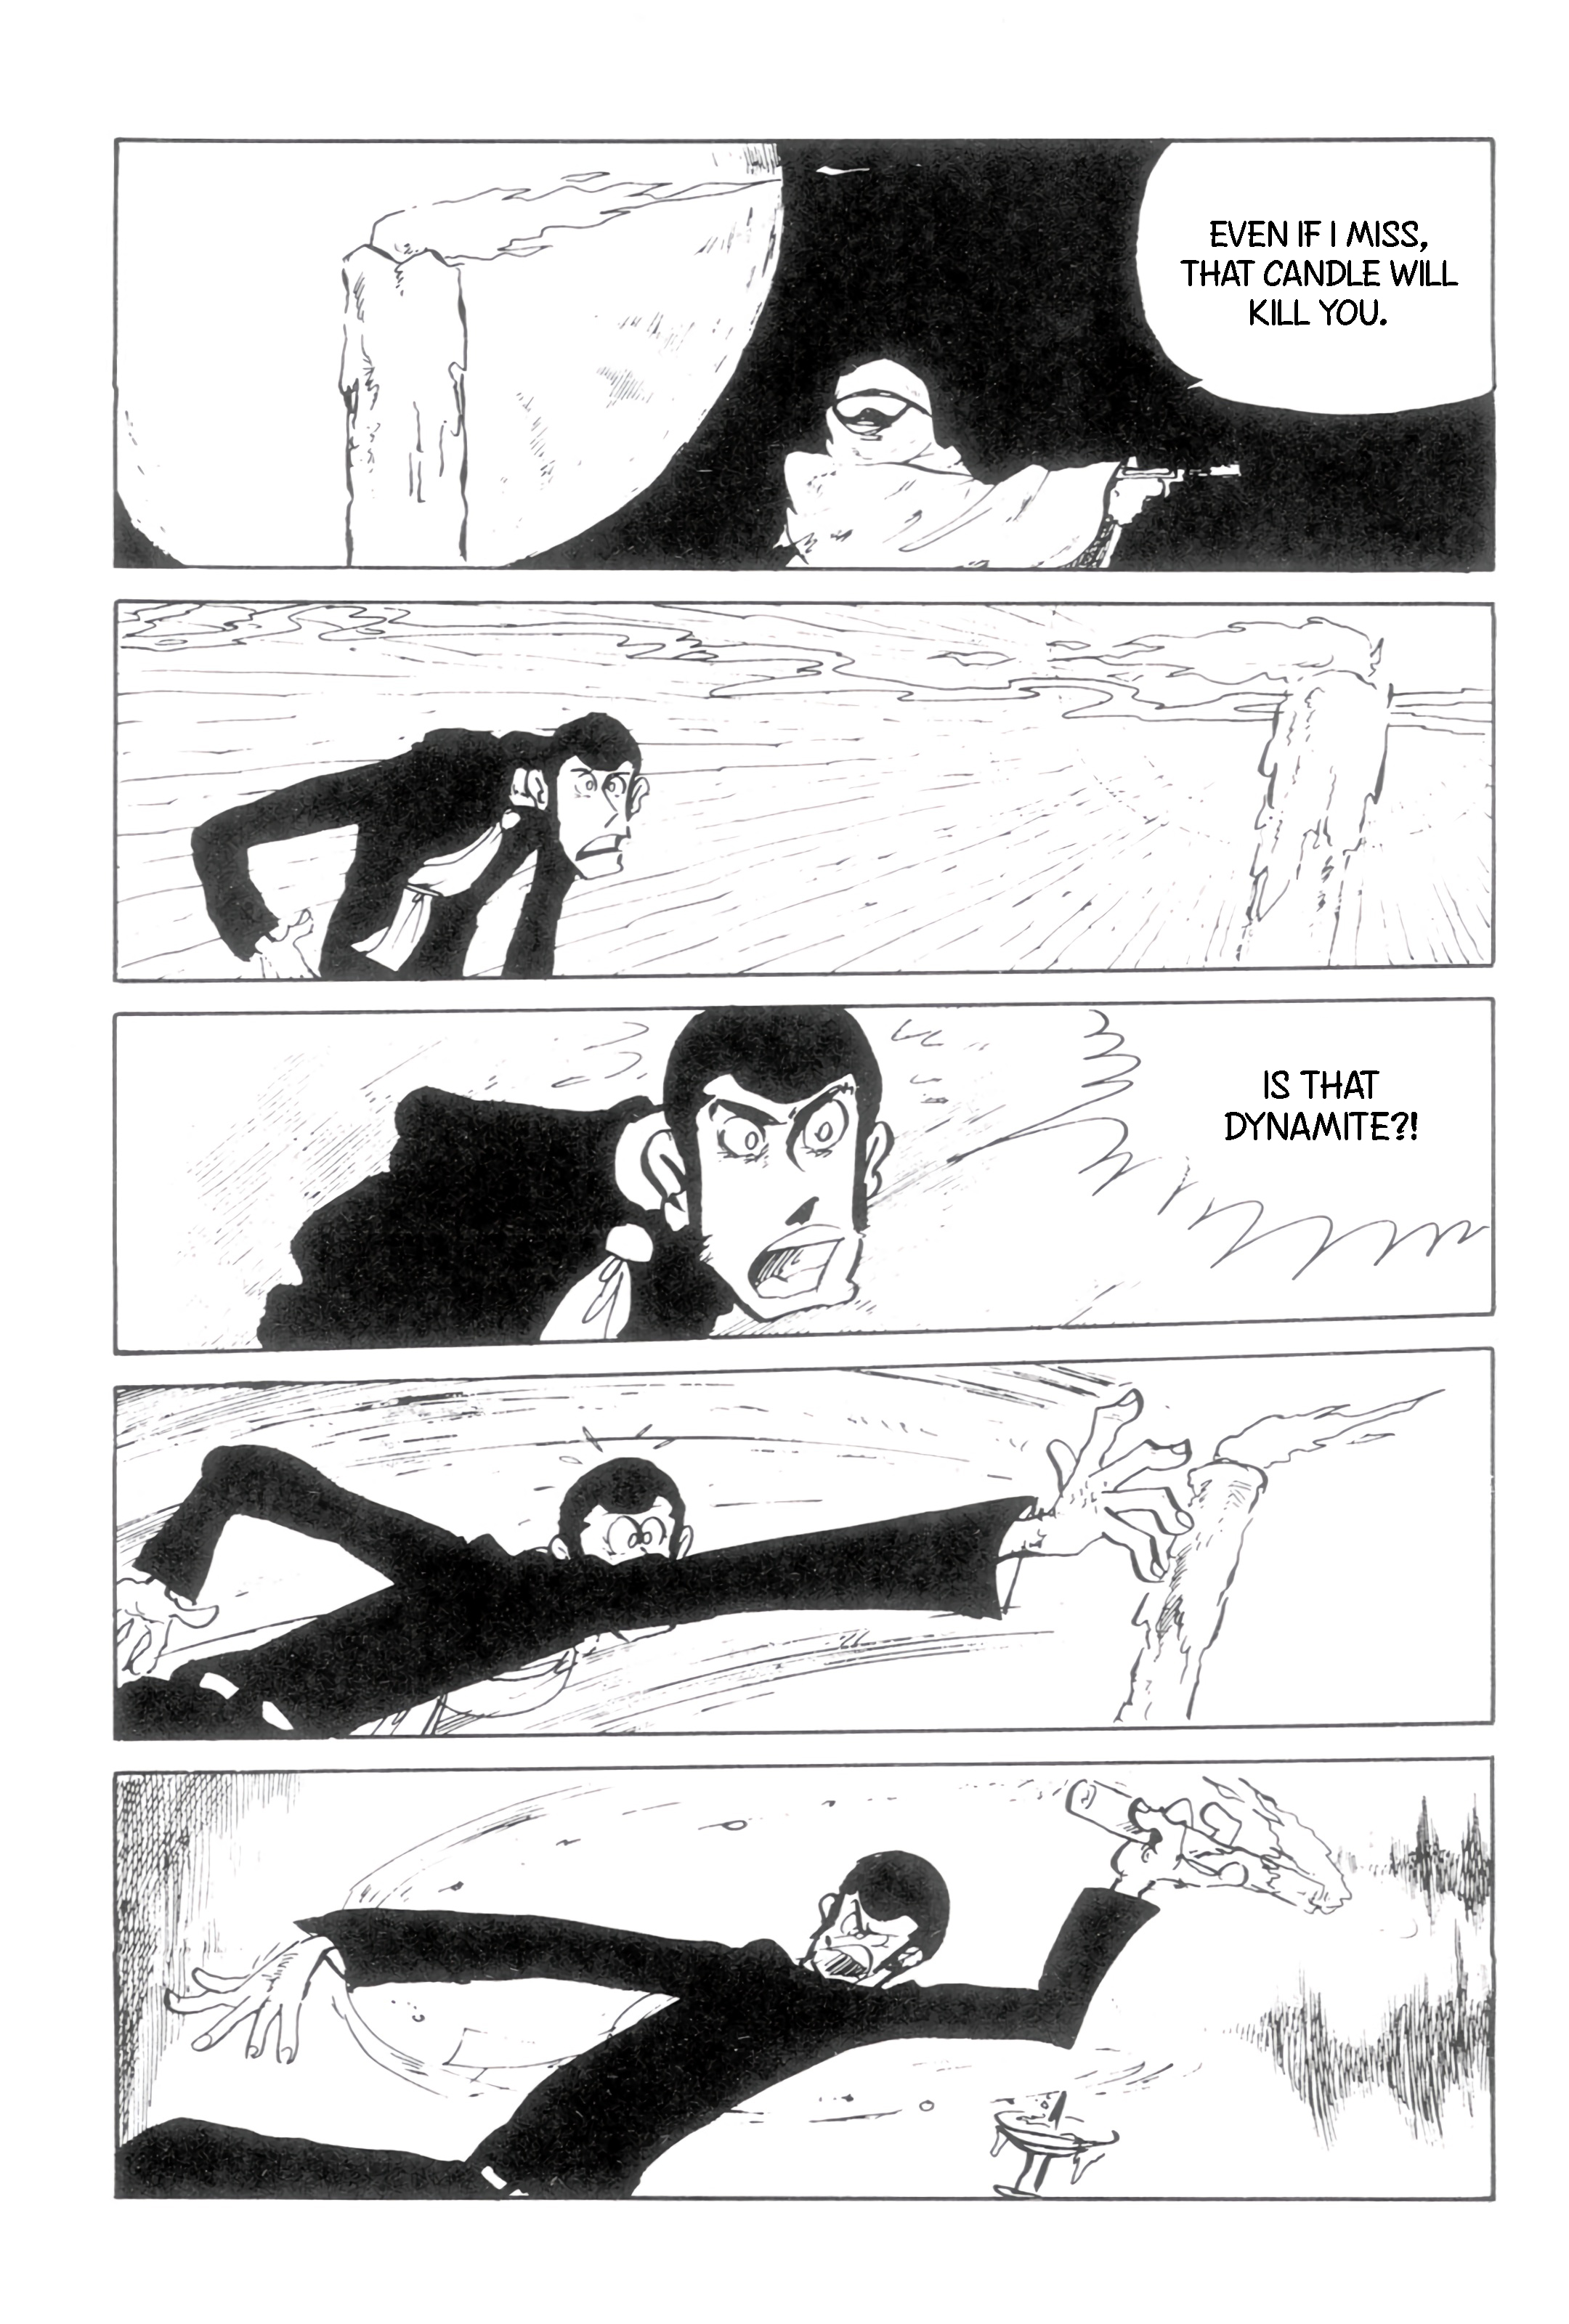 Lupin Iii: World’S Most Wanted - 135 page 15-786642b8